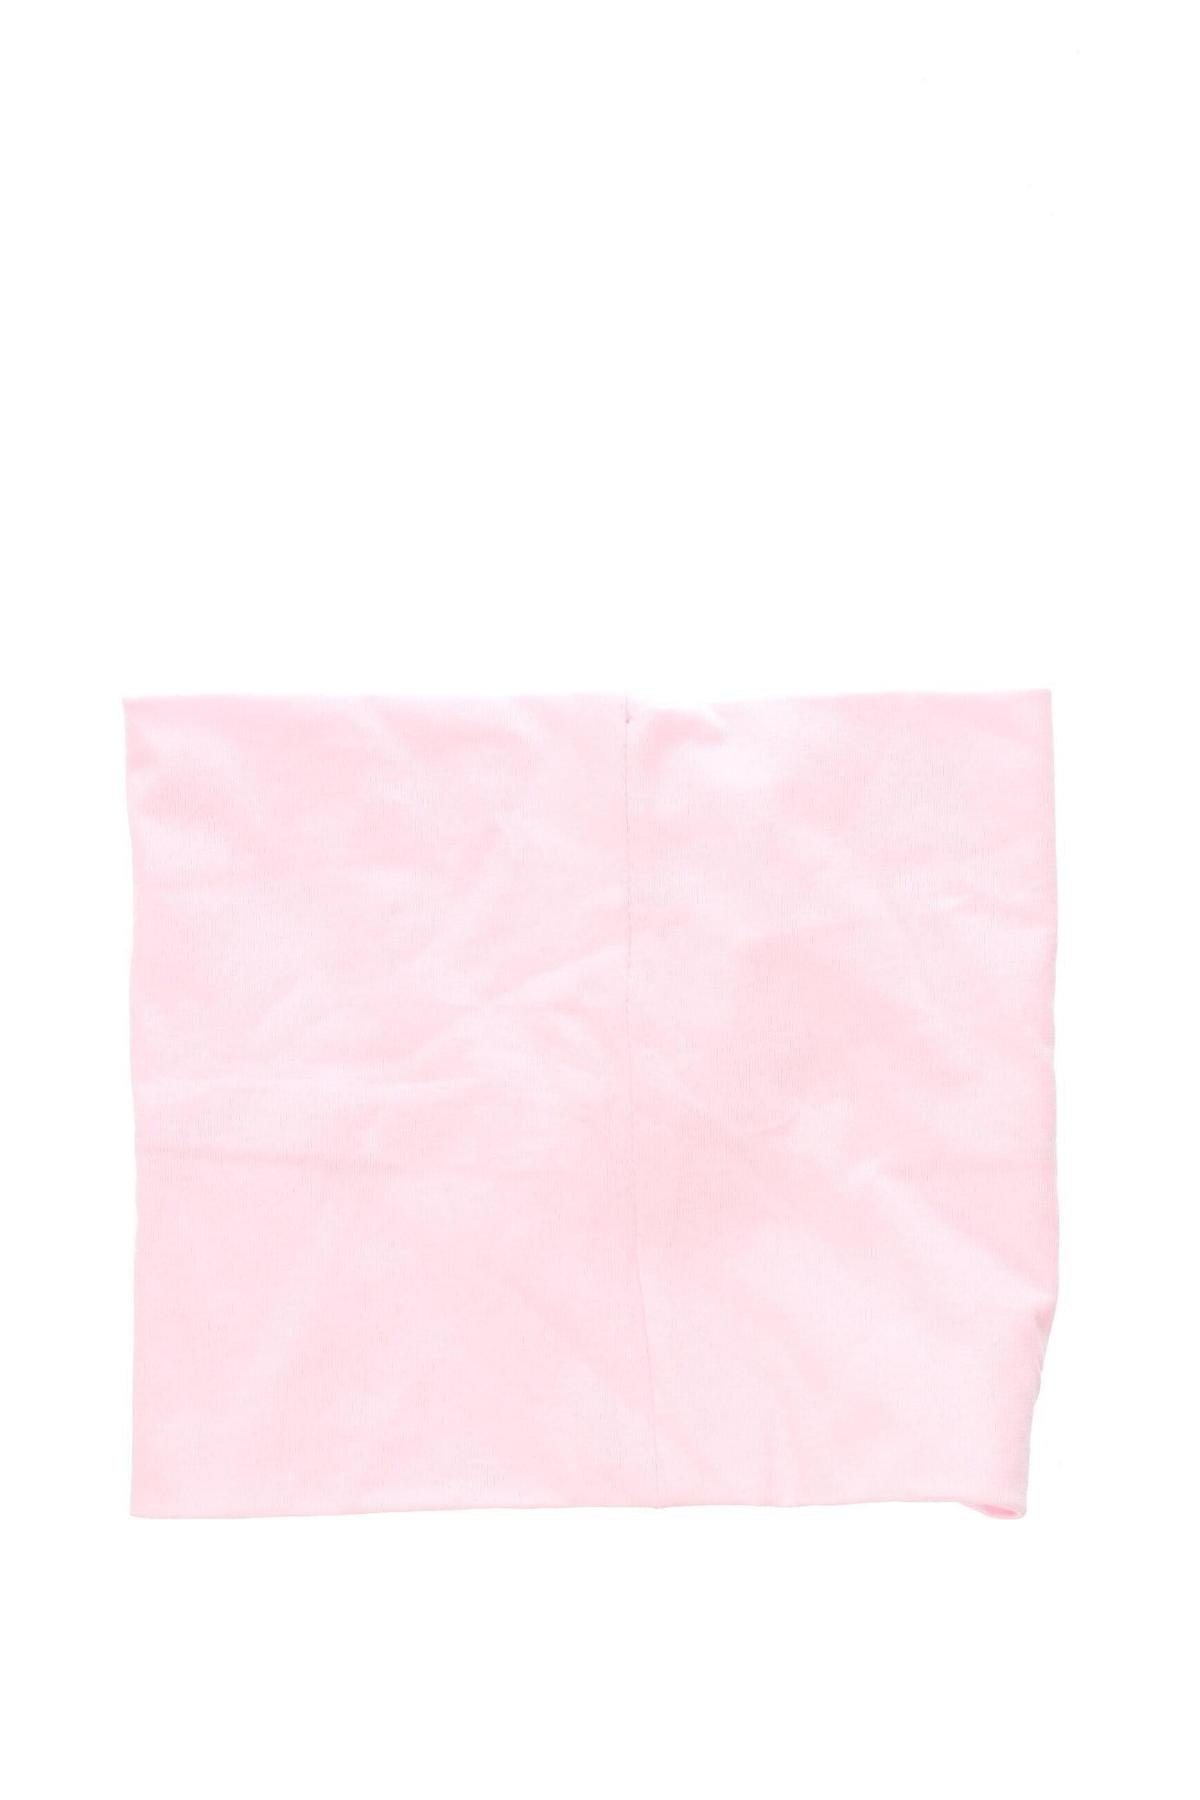 Kinderschal Urban Outfitters, Farbe Rosa, Preis 22,16 €